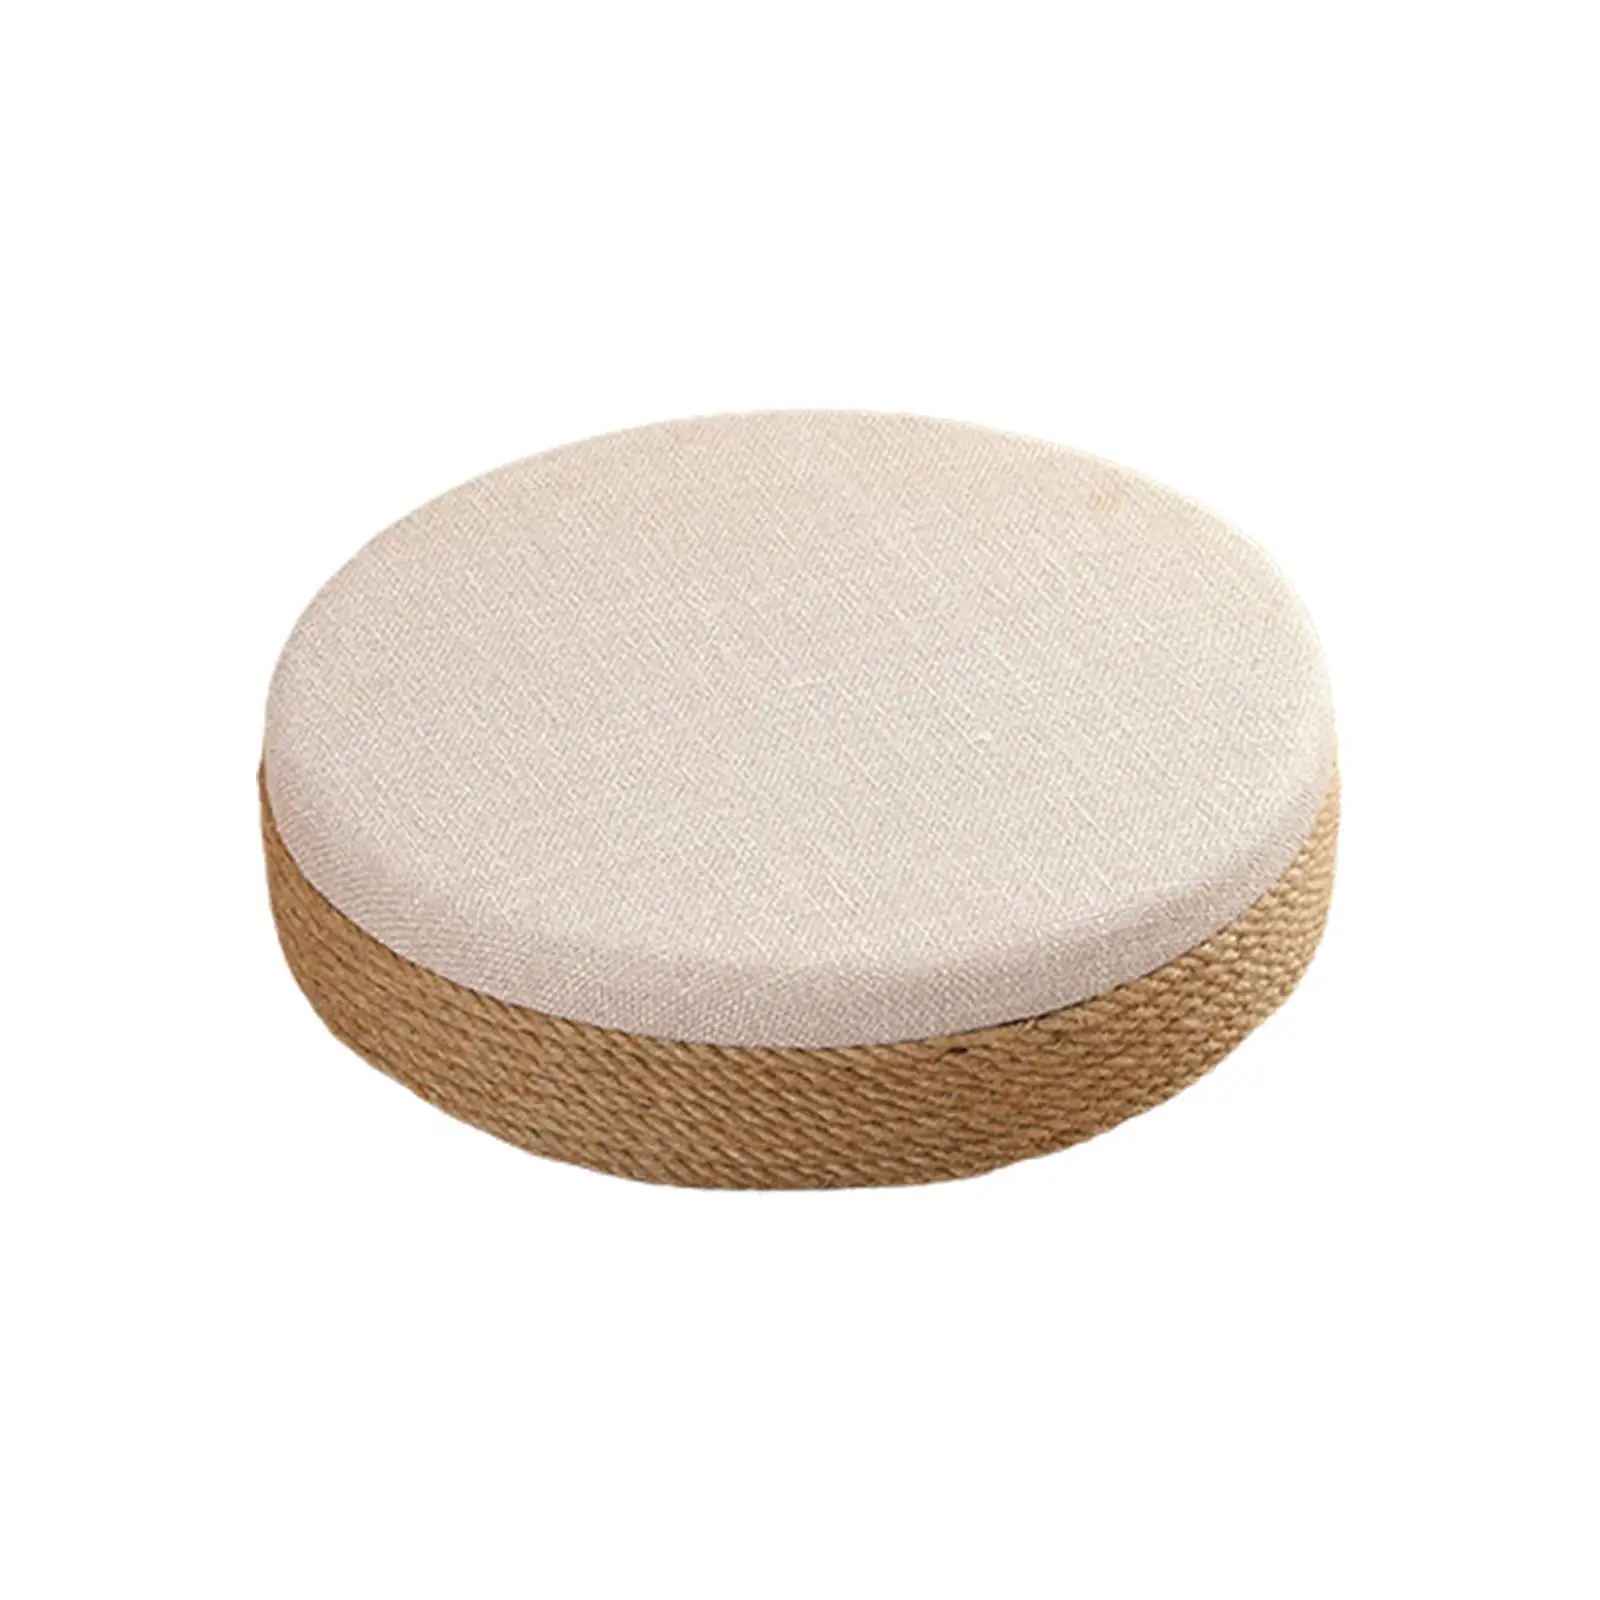 Round Cushion Pouf Mat Ottoman Seat Pad Tatami Floor Pillow for Balcony Home Living Room Dining Room Decor